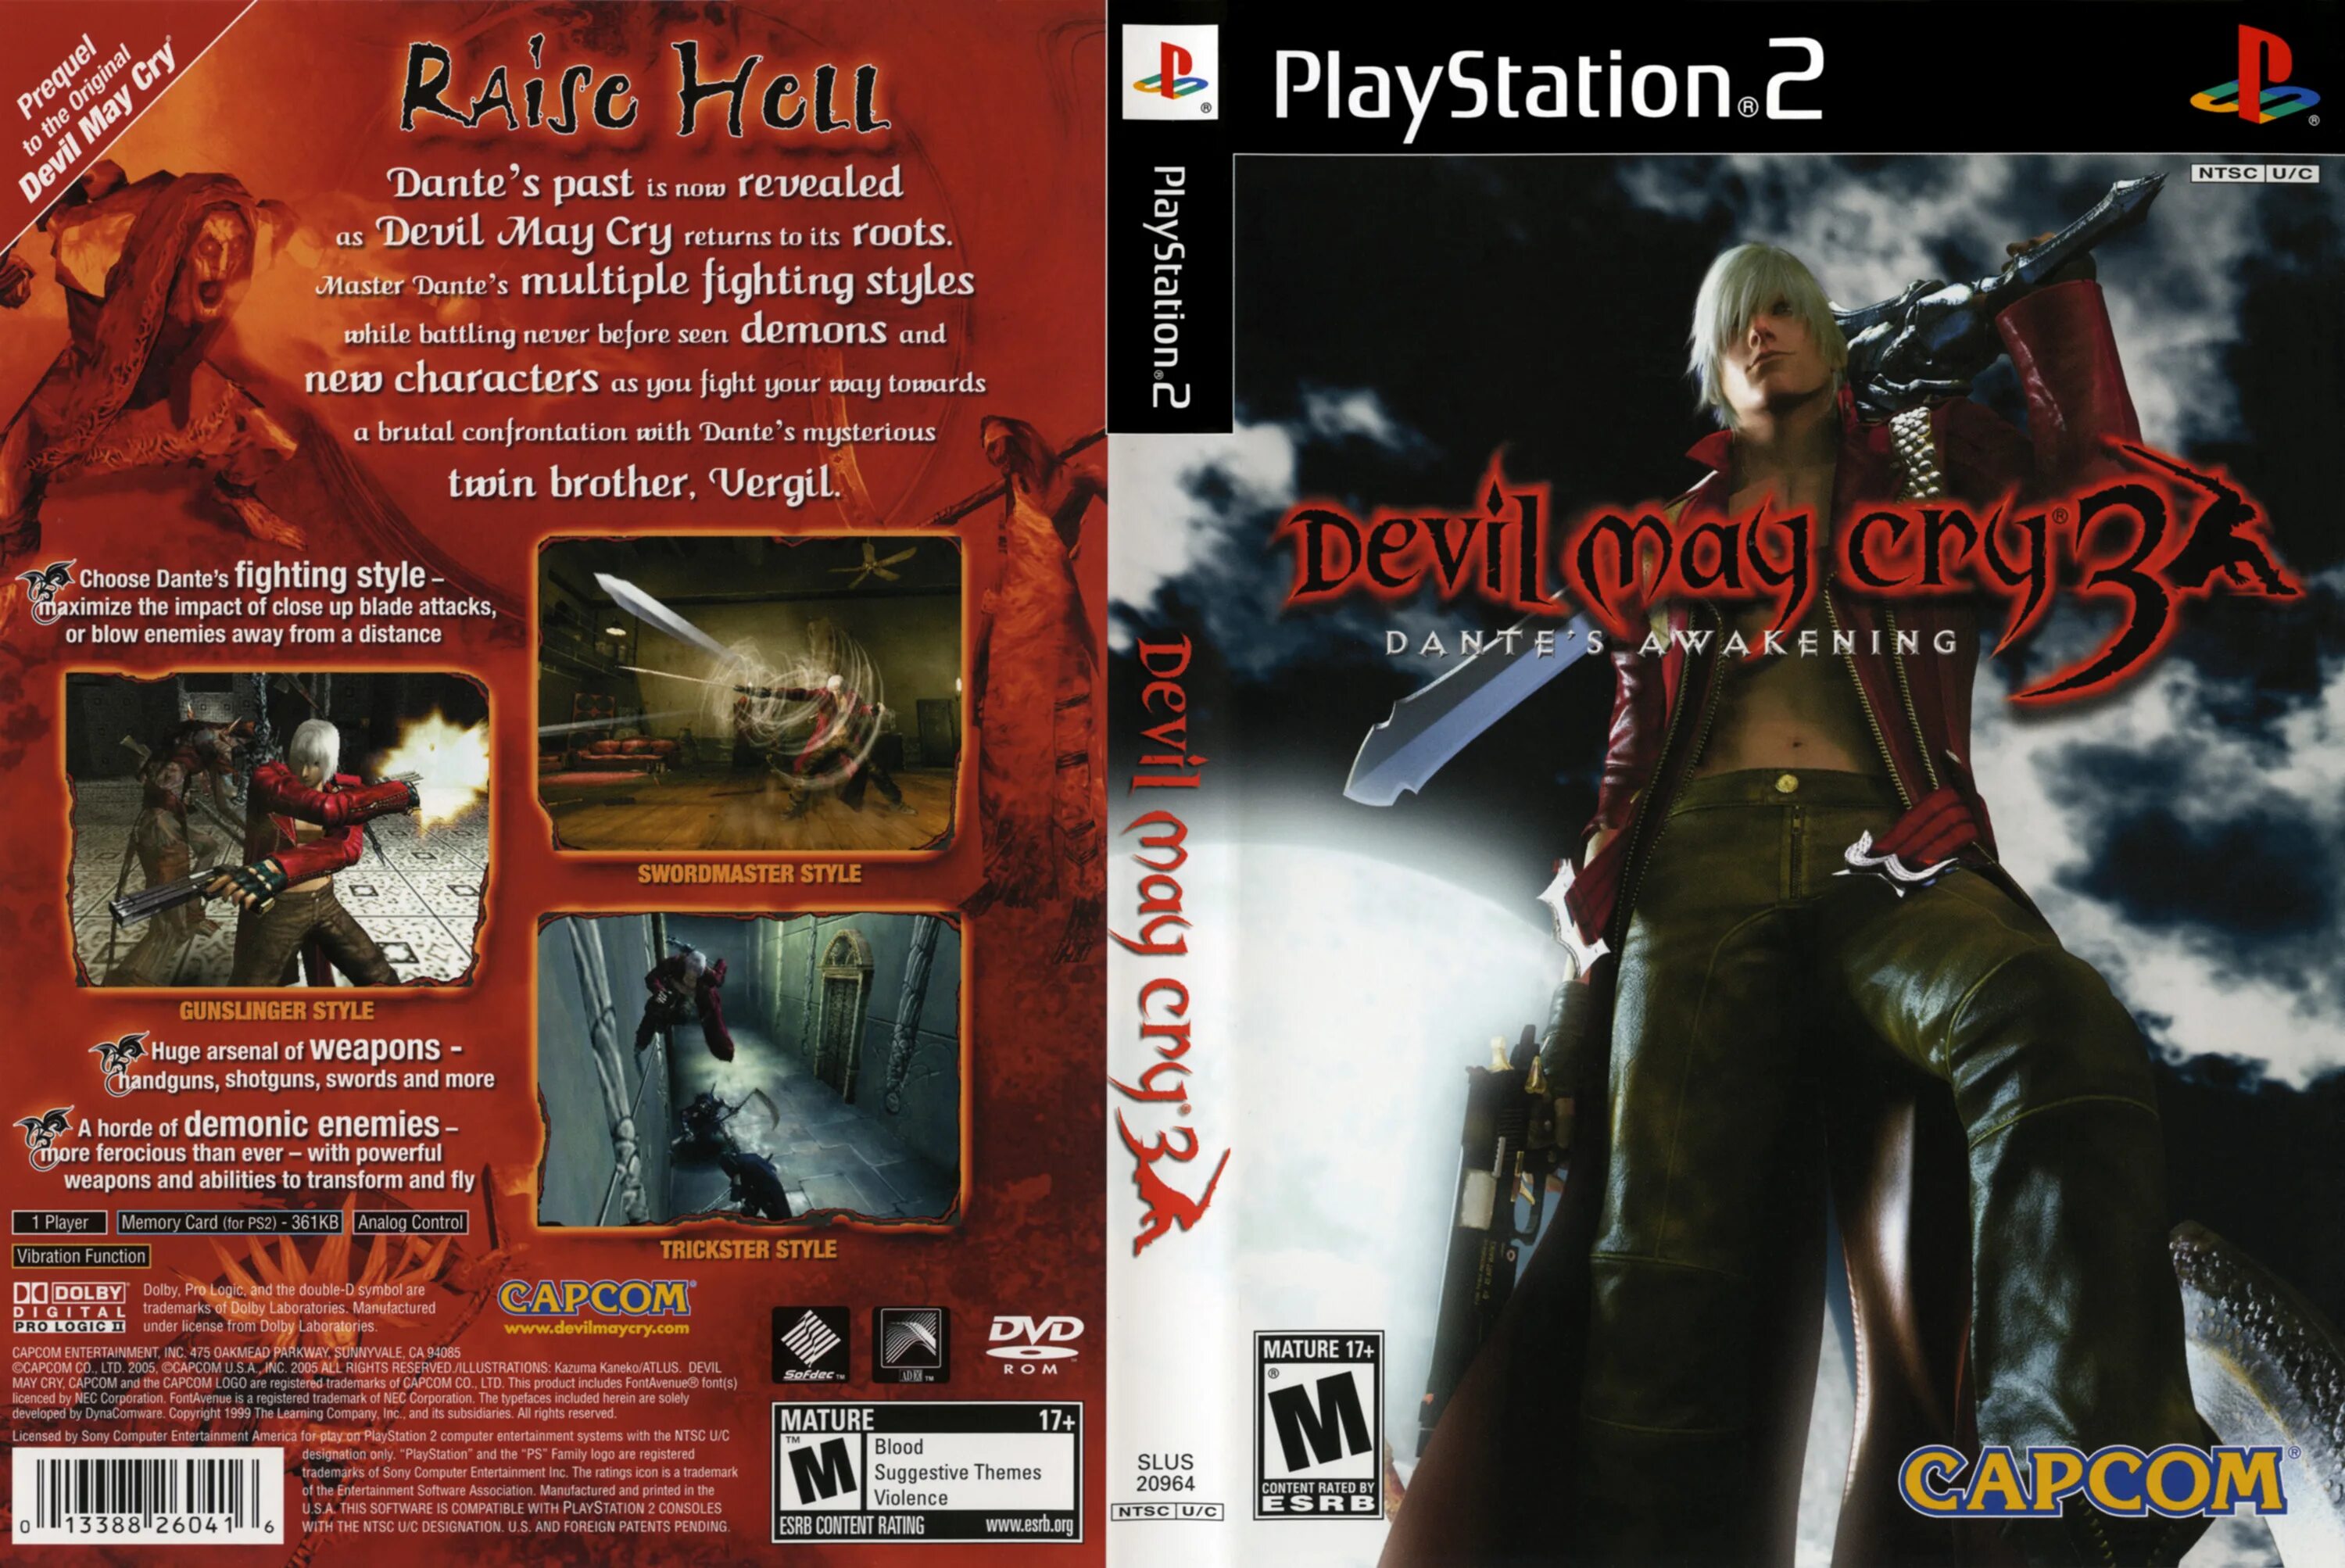 Devil May Cry 3 ps2 диск. Devil May Cry 3 Special Edition ps2. Обложка Devil my Cry PS 2. DMC 2 ps2.